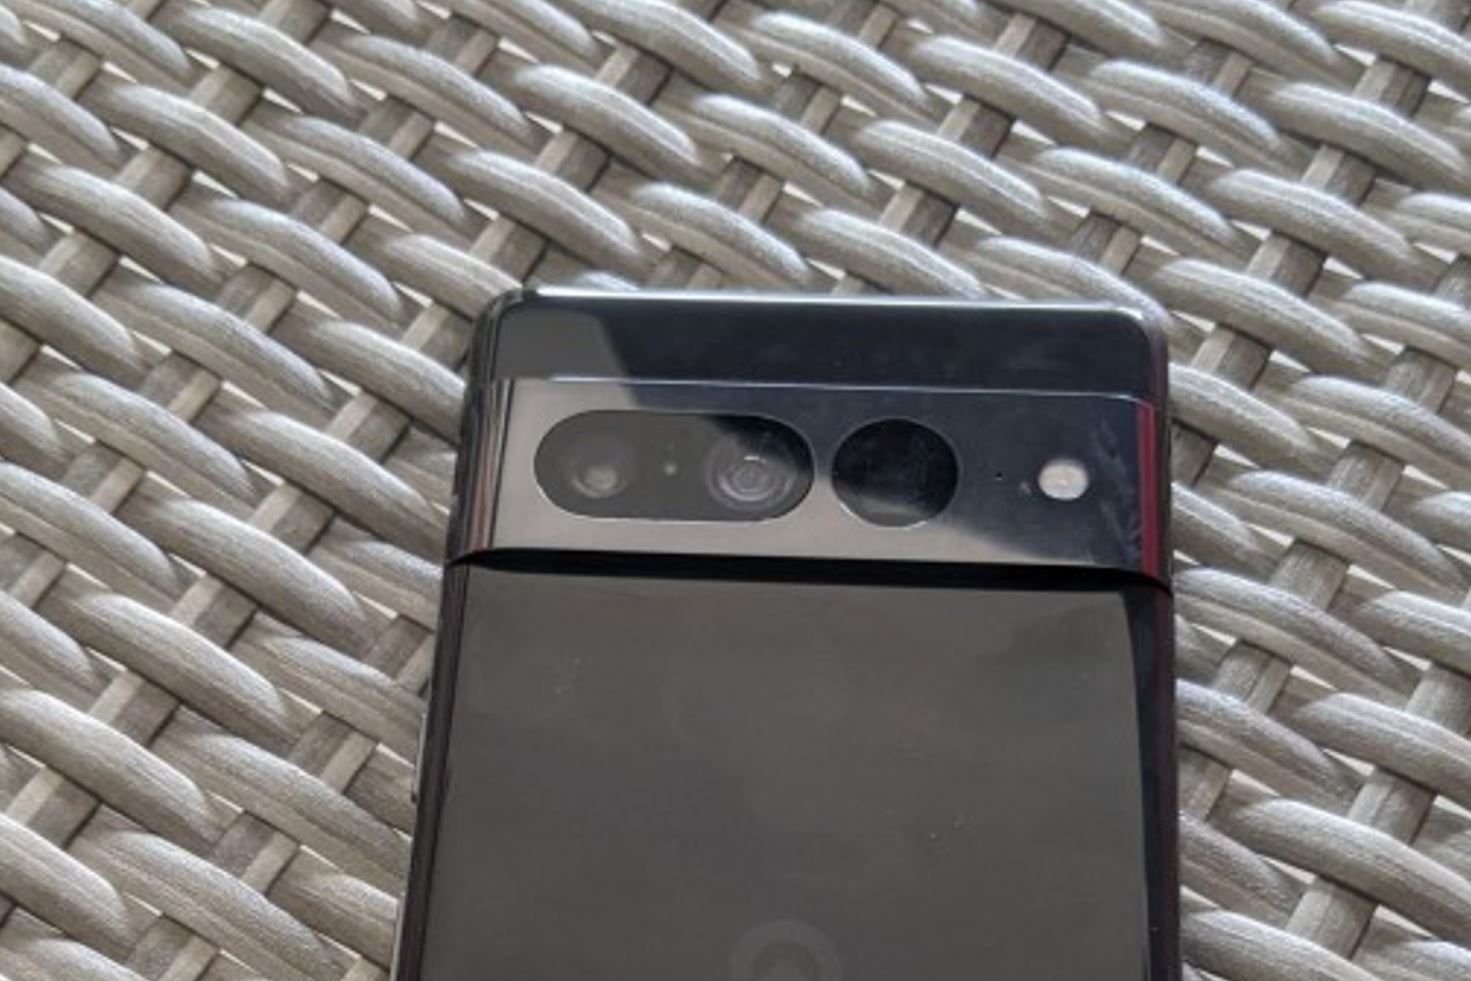 A prototype of the Google Pixel 7 Pro was also filmed